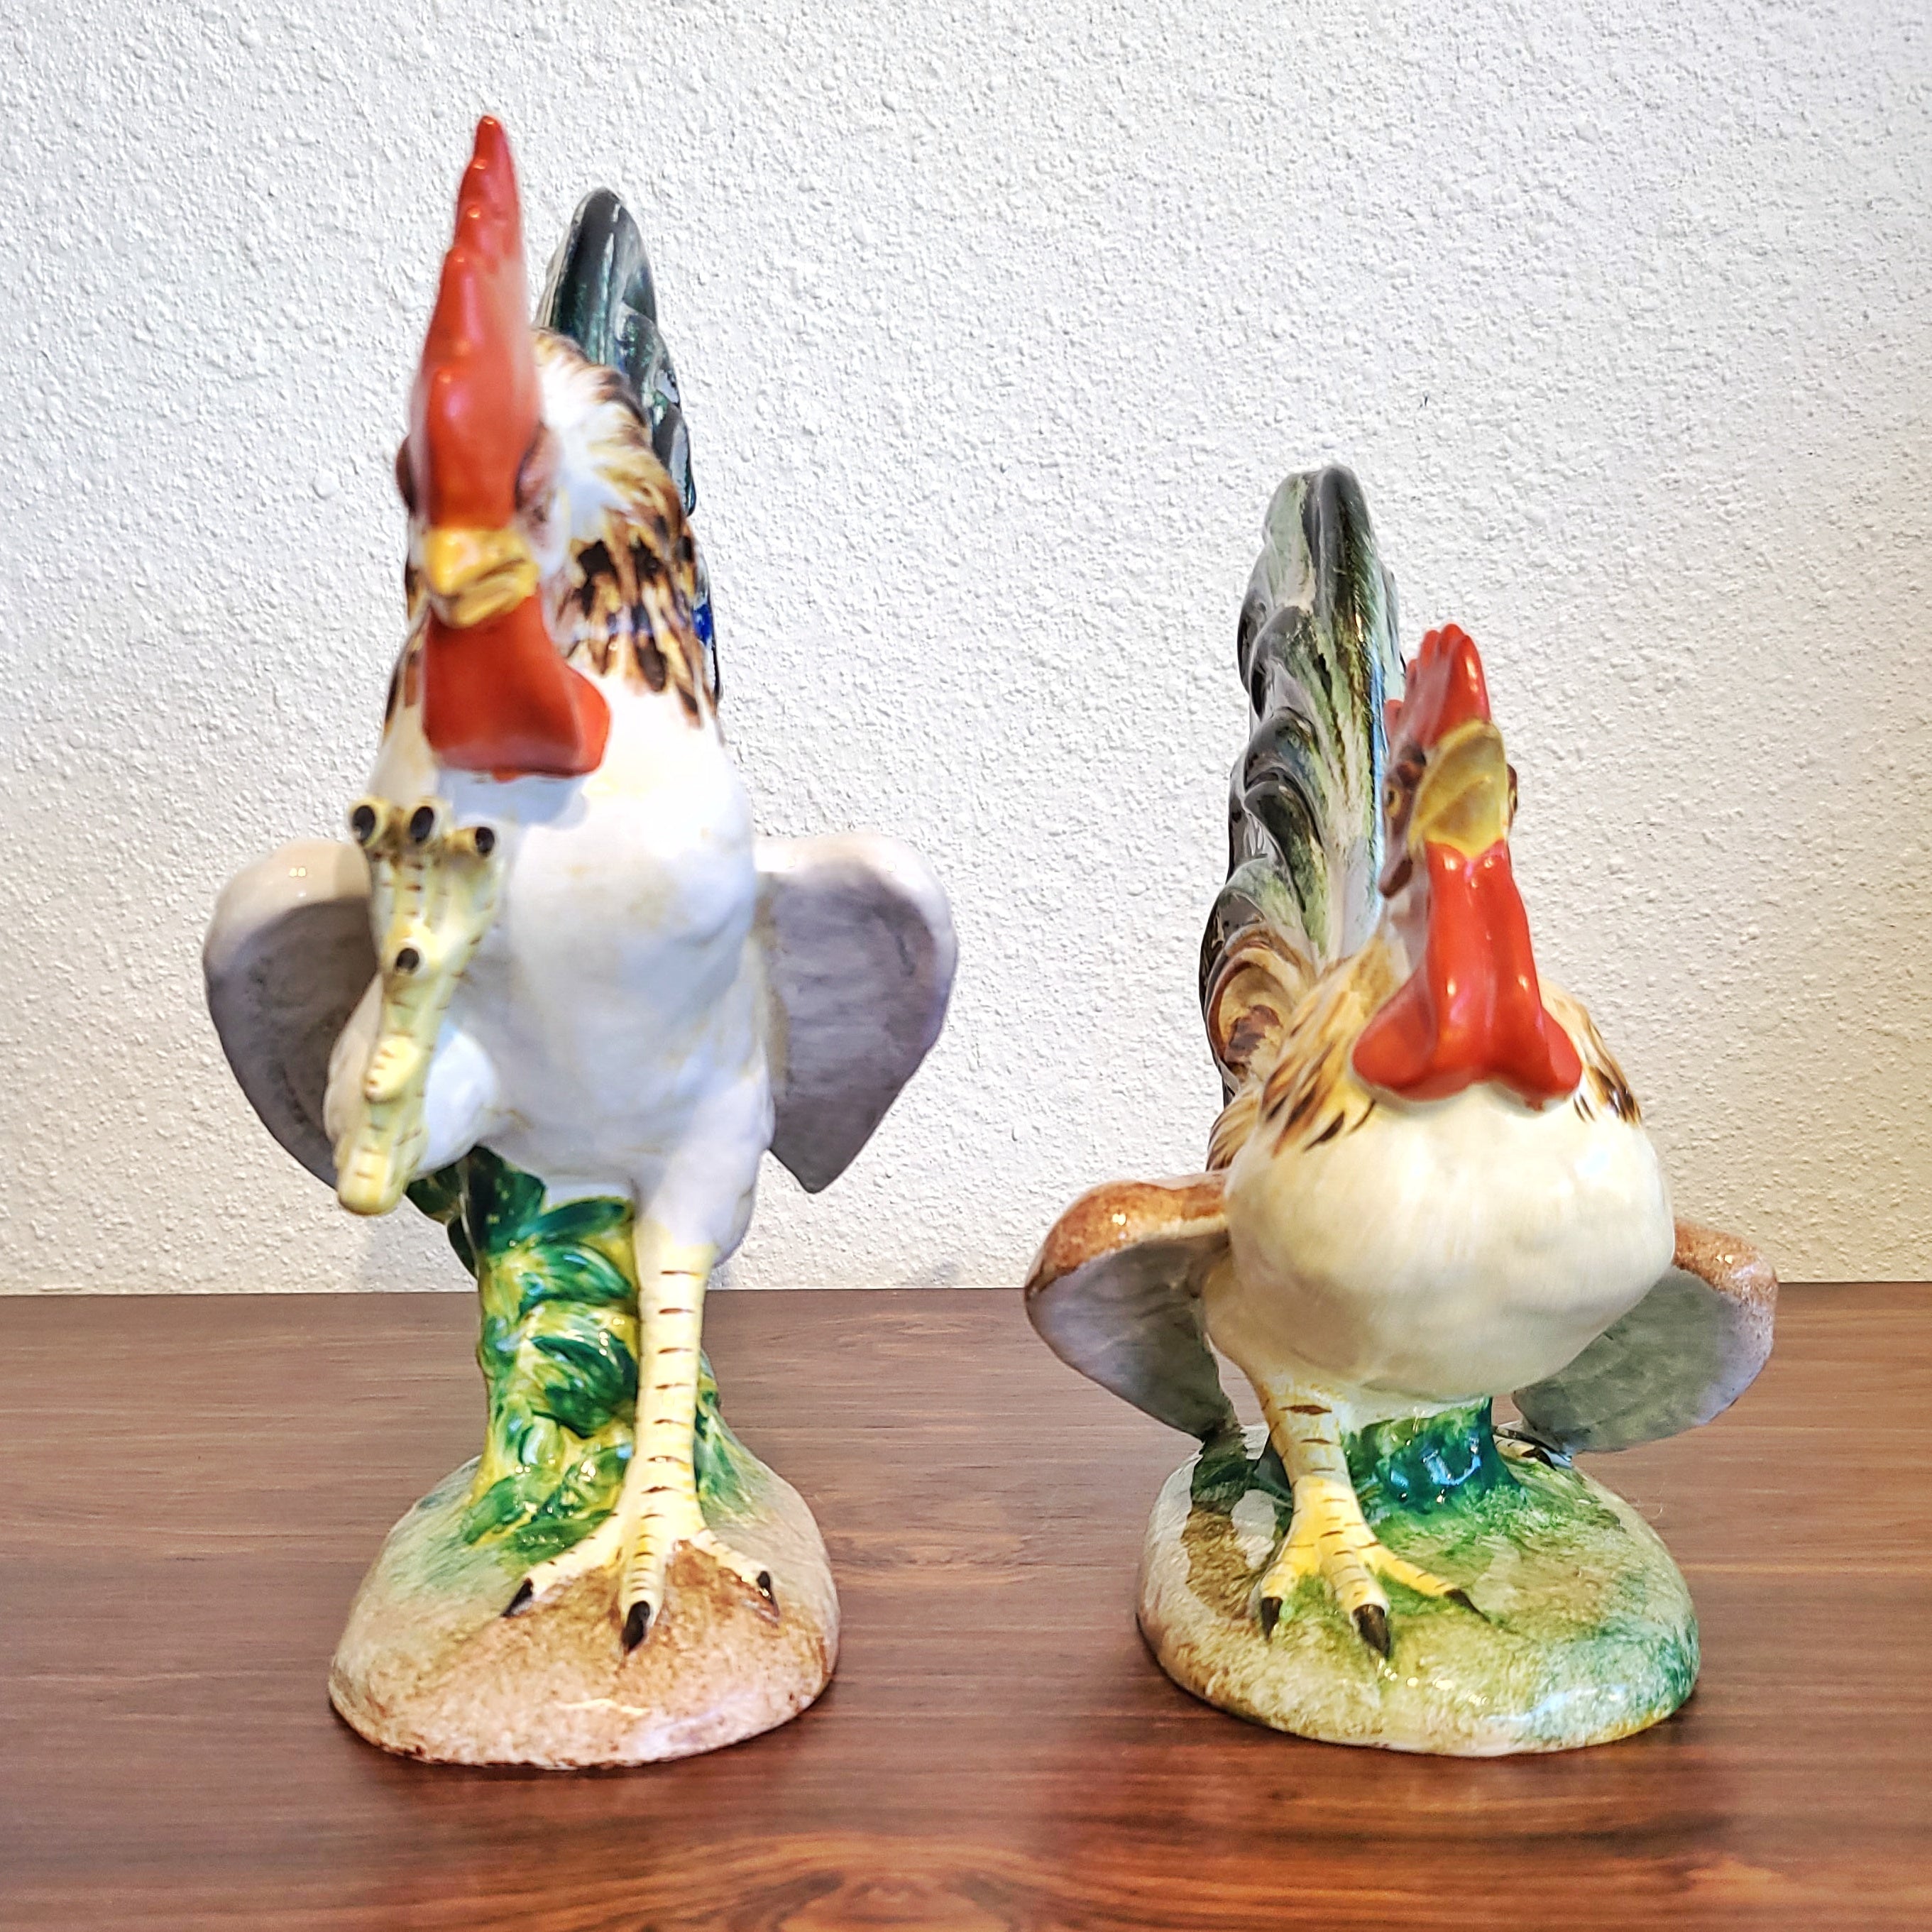 "FIGHTING COCKS" FIGURINES BY URBANO ZACCAGNINI (PAIR) FLORENCE, ITALY